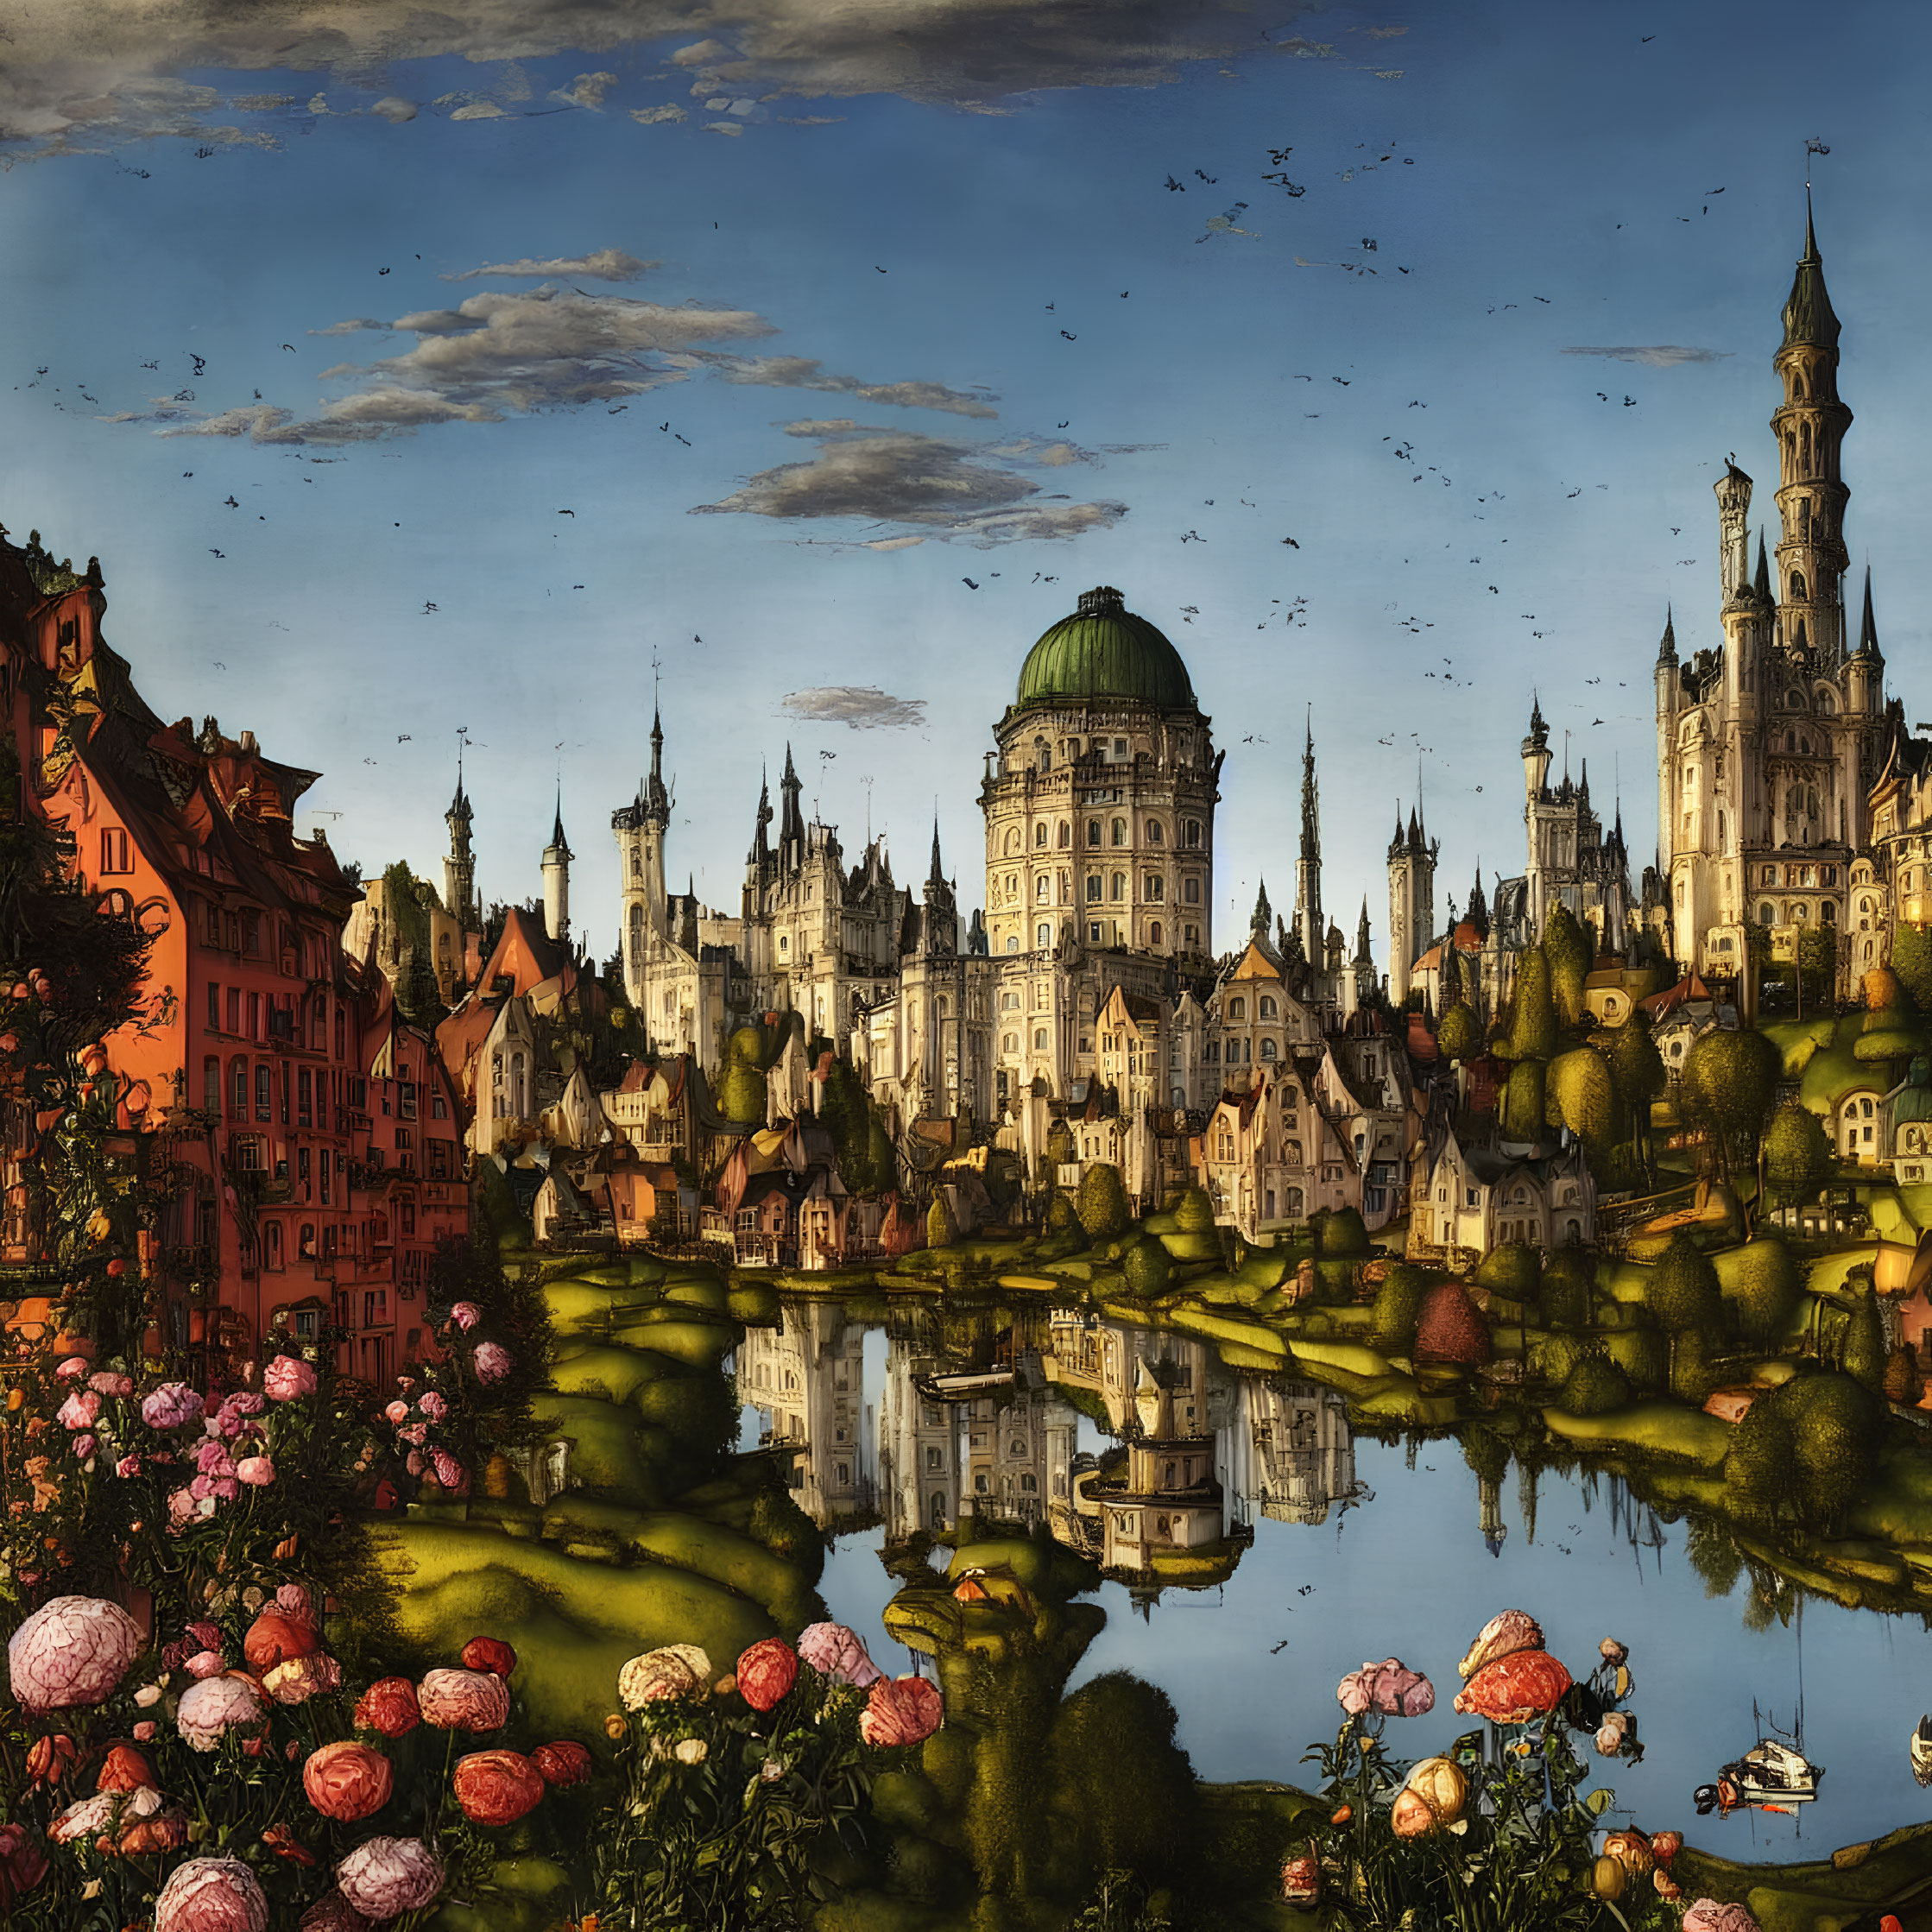 Fantastical cityscape with castle, river reflection, dramatic sky, and vibrant flowers